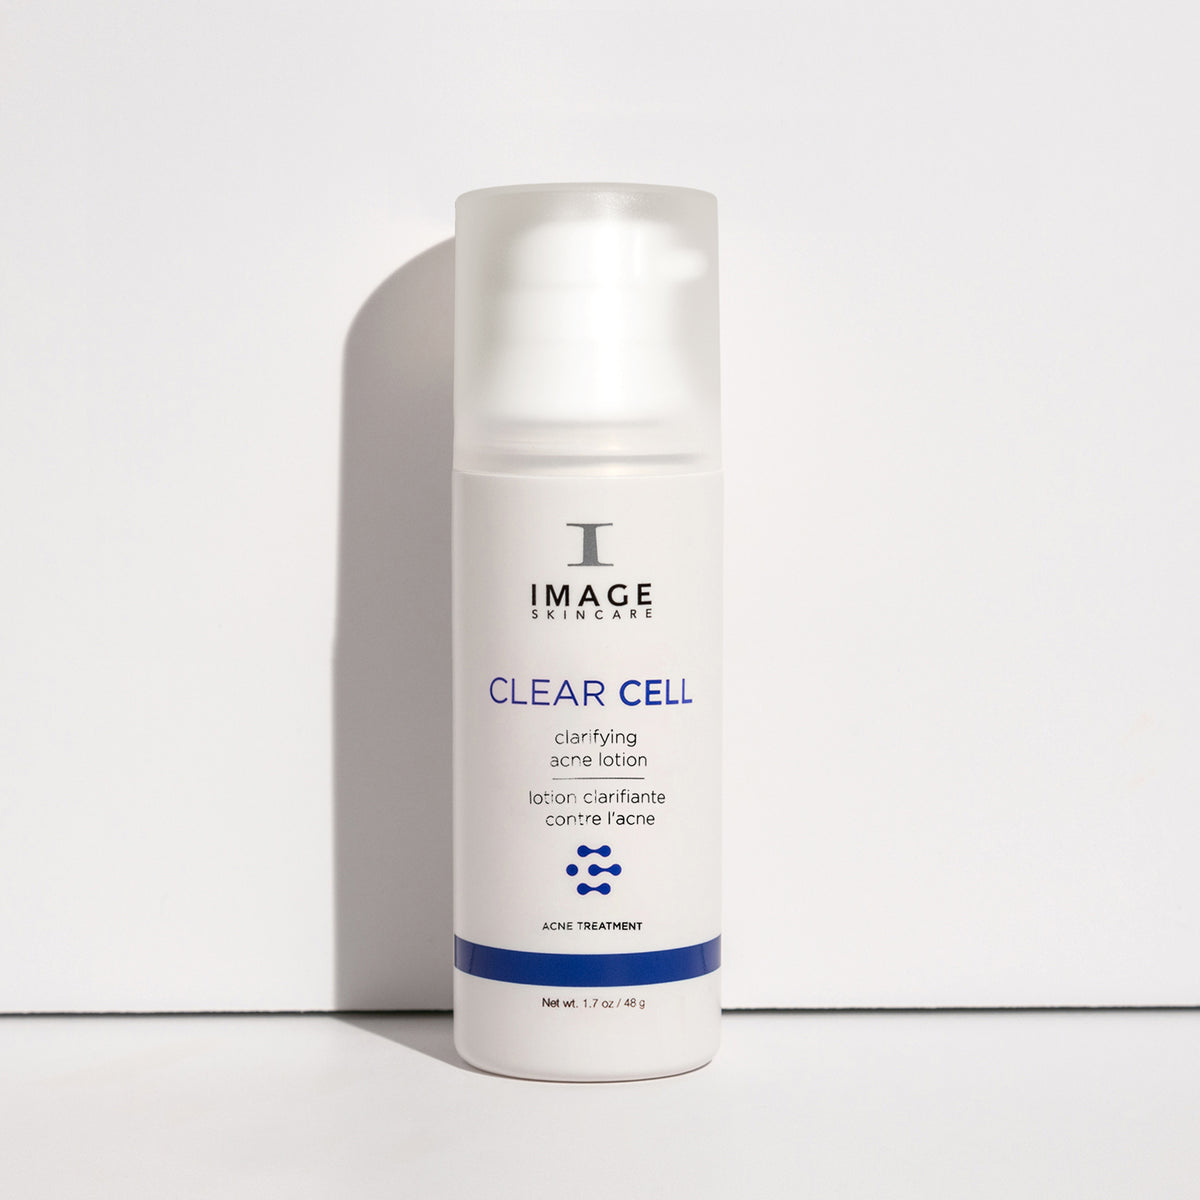 Image Skincare - CLEAR CELL CLARIFYING ACNE LOTION 1.7oz